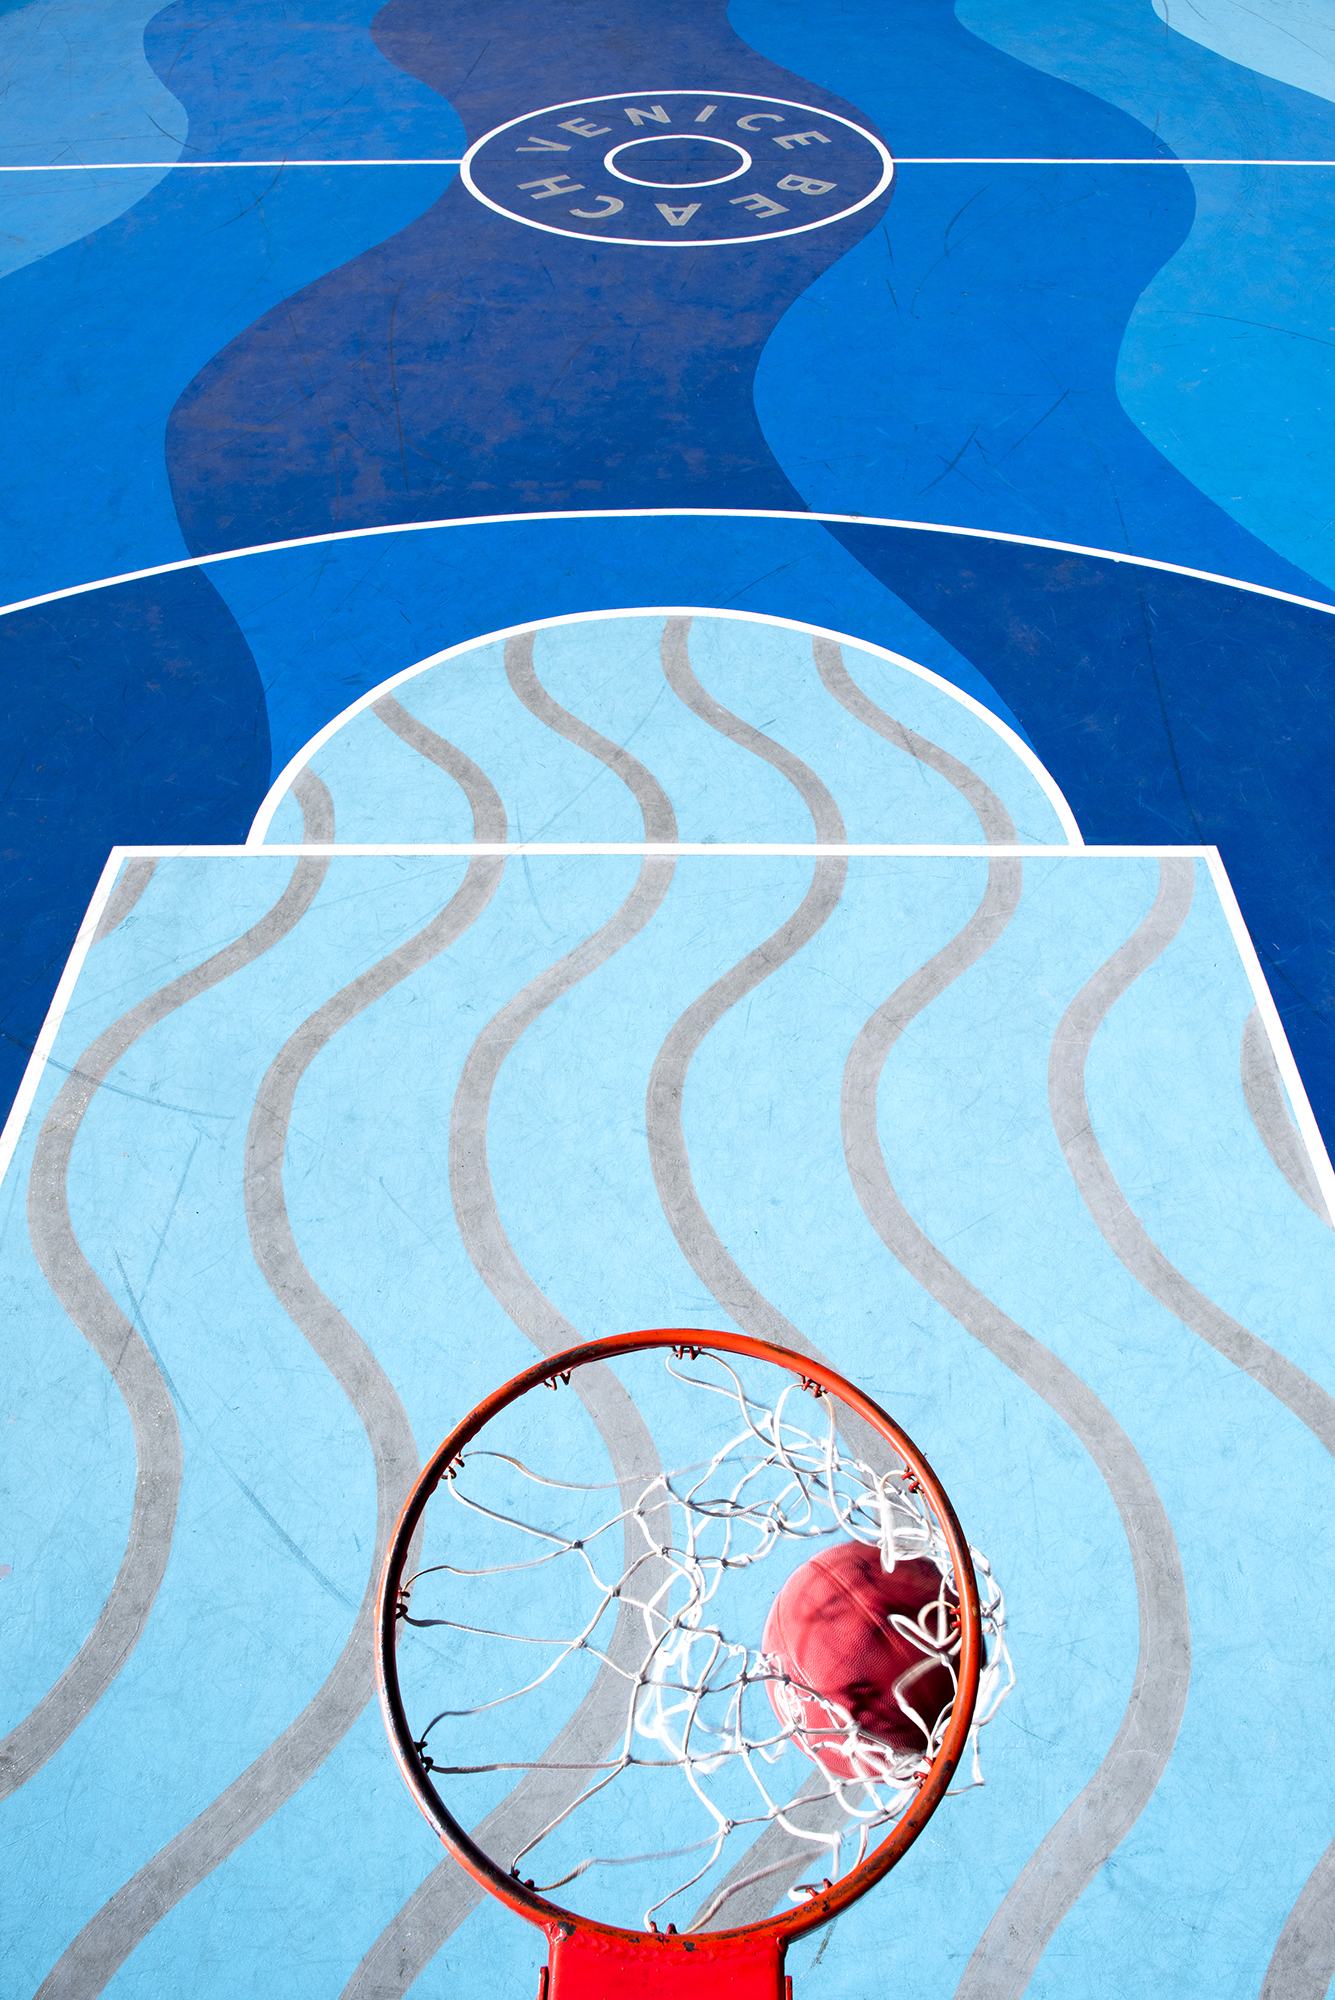 Venice Beach Basketball Courts designed by Project Backboard